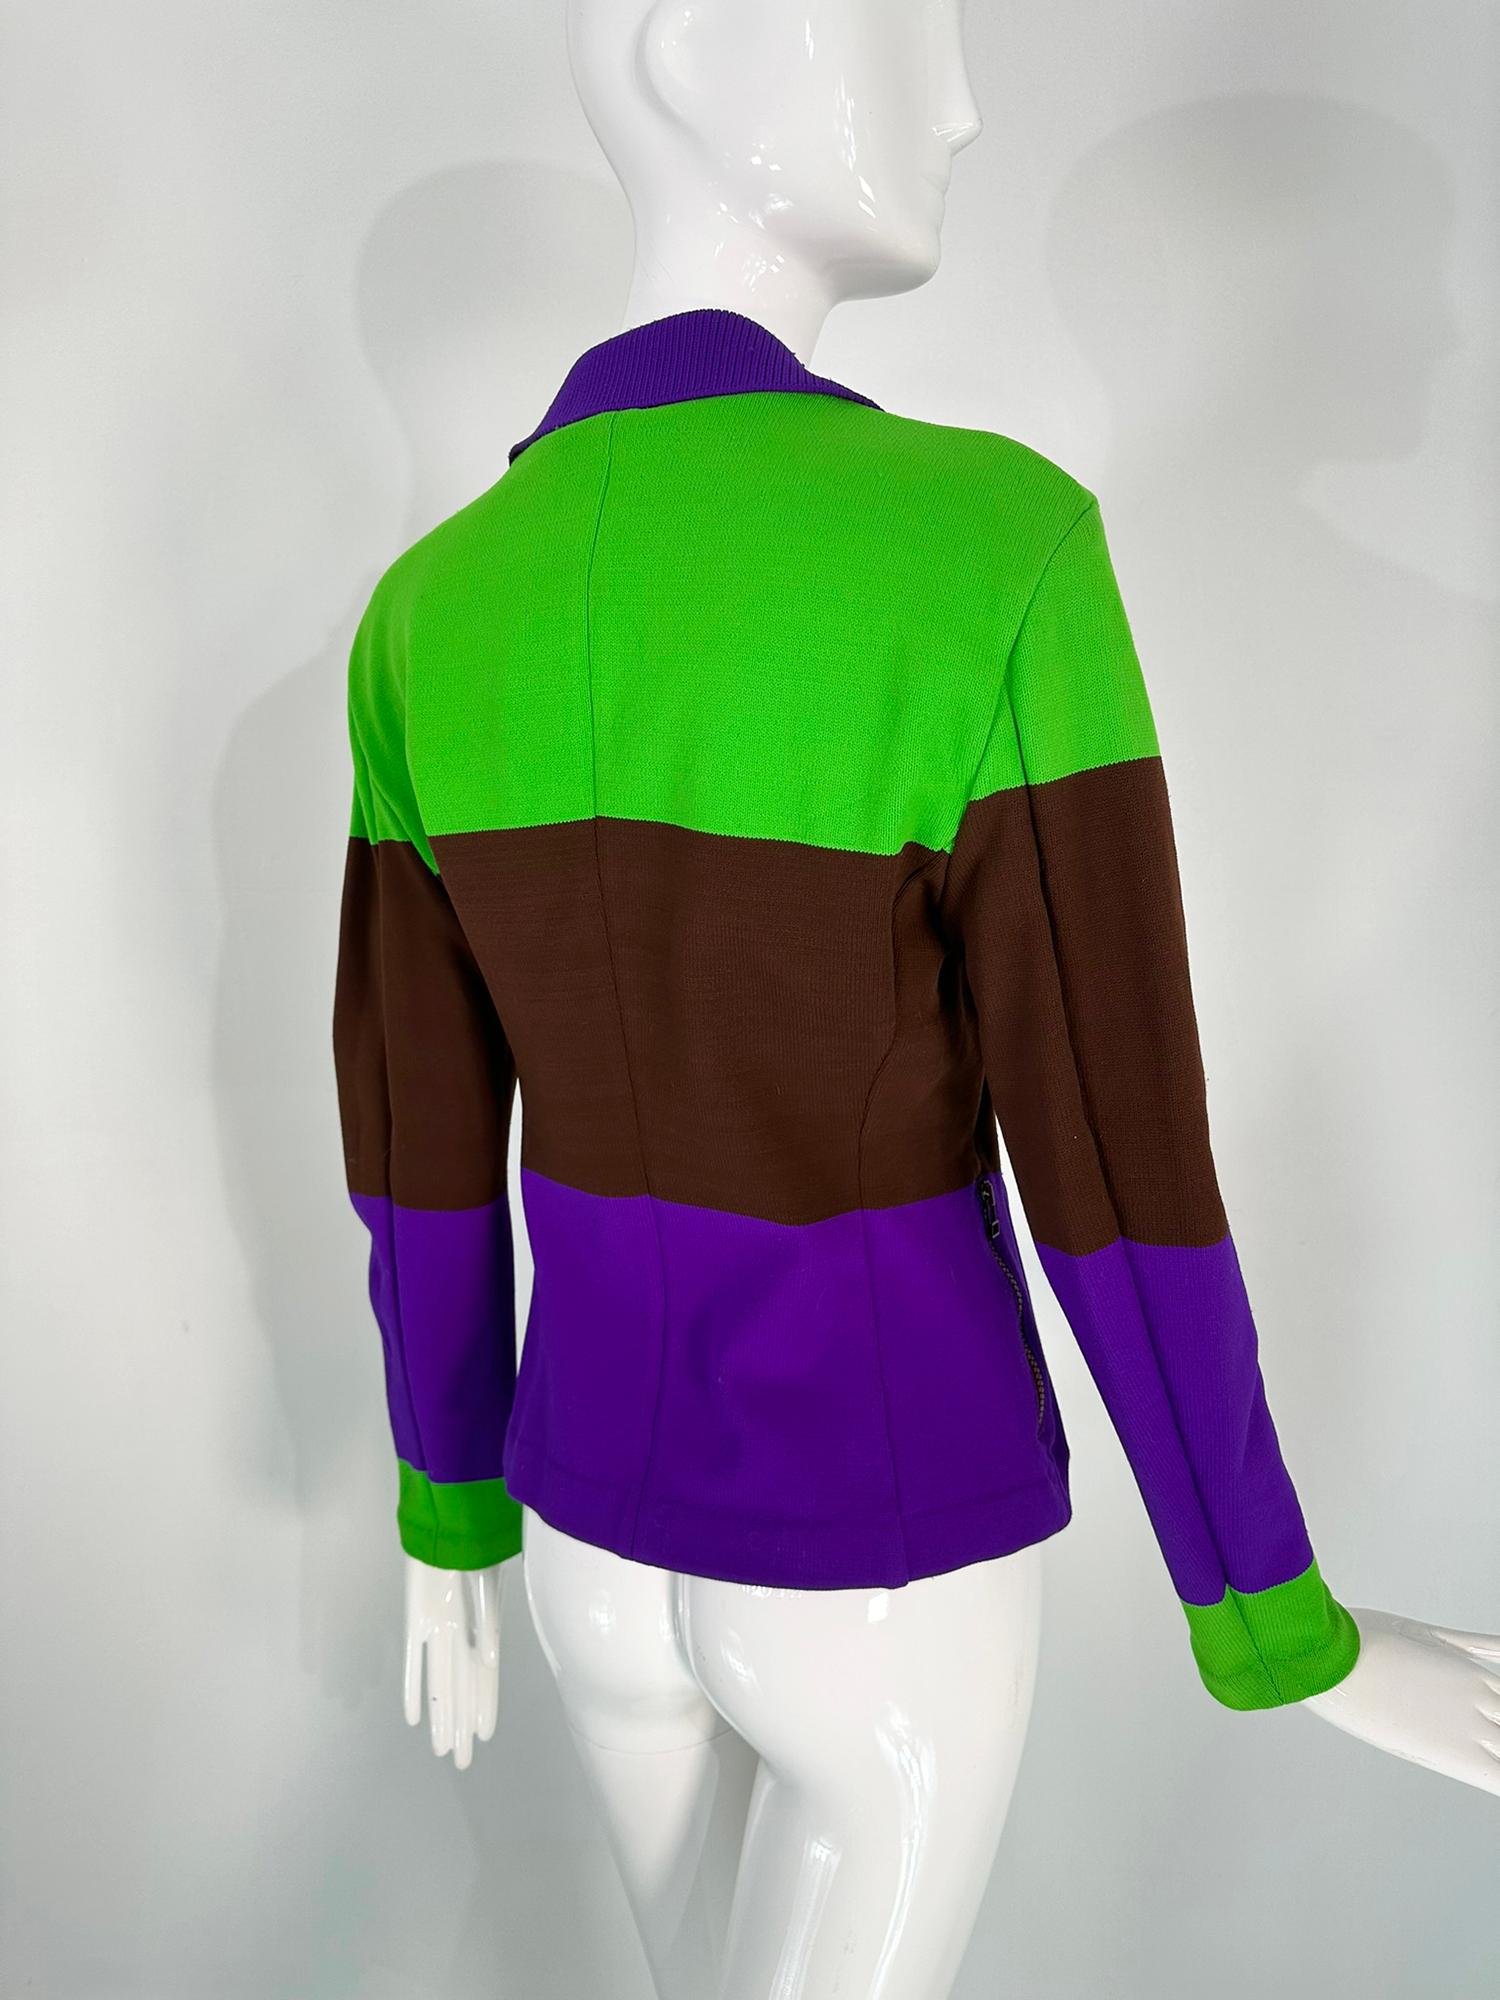 Issey Miyake Colour Block Nylon Knit Jacket in Acid Green Brown & Purple Small For Sale 1